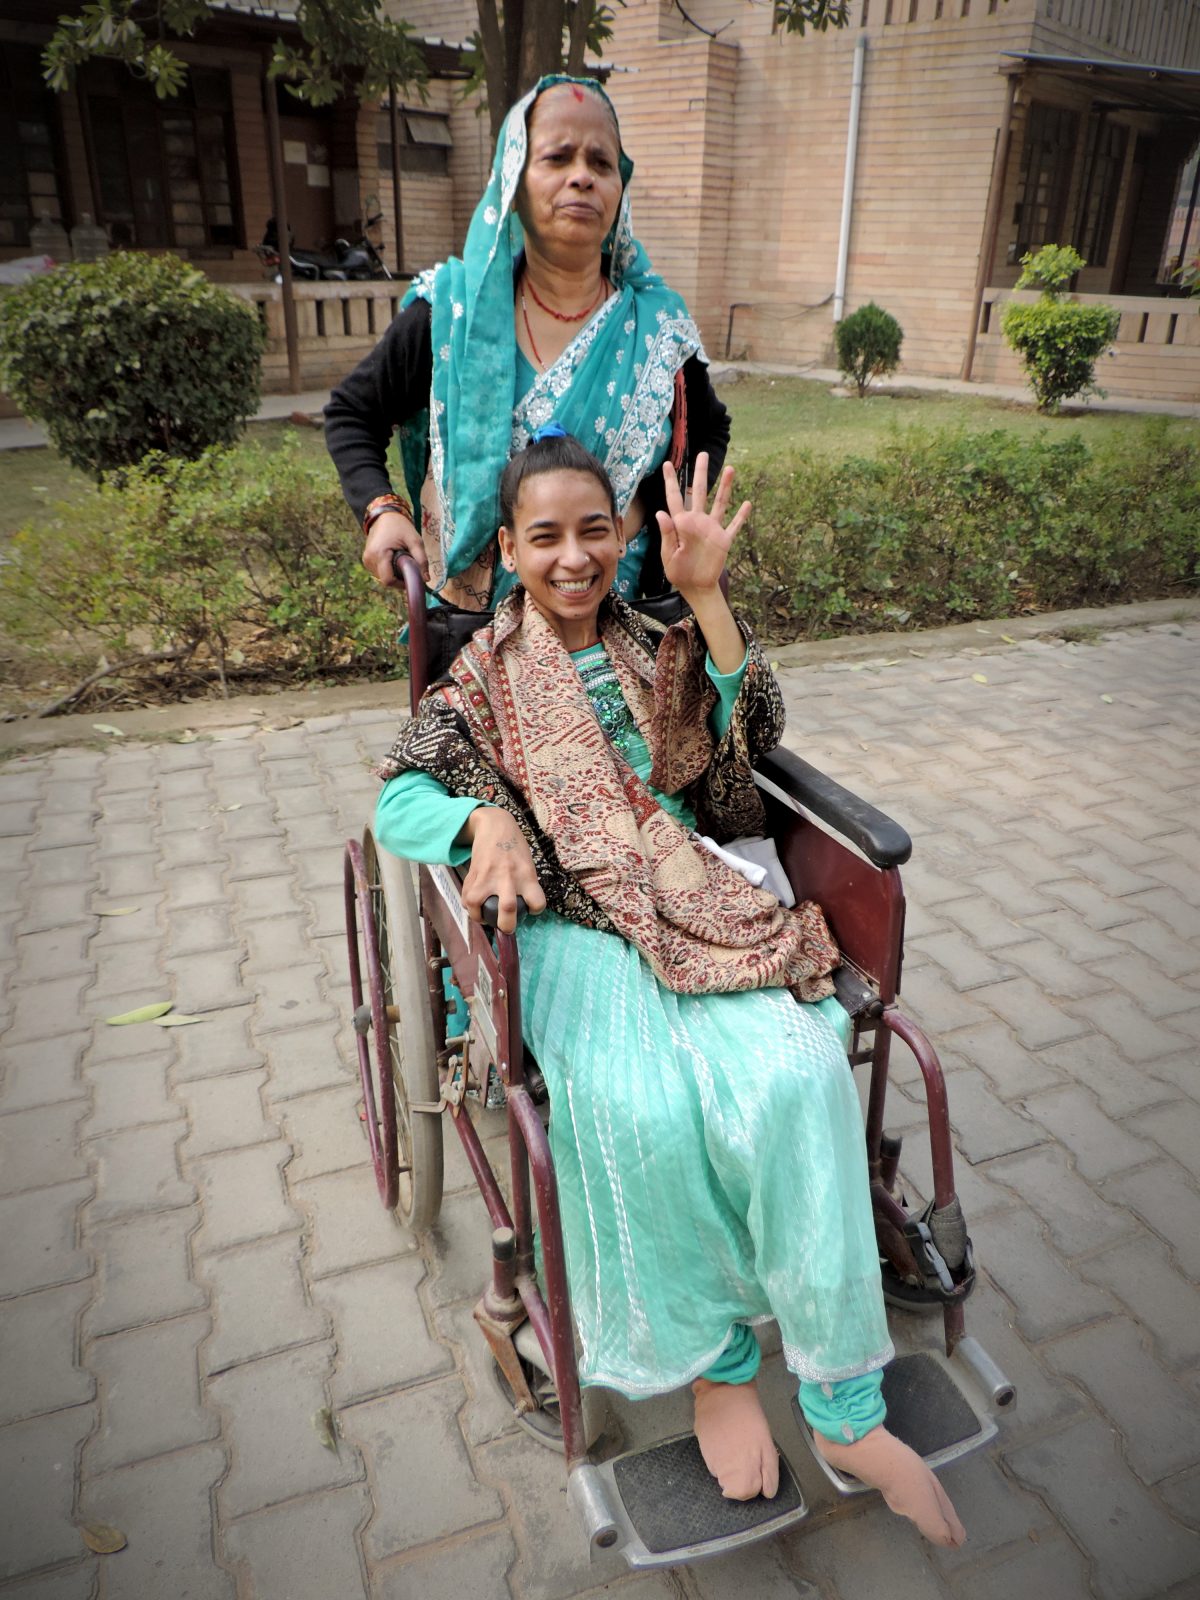 TBI Blogs: Cerebral Palsy Can Be Debilitating for Many, but 19-Year-Old Anmol Has Refused to Accept Defeat